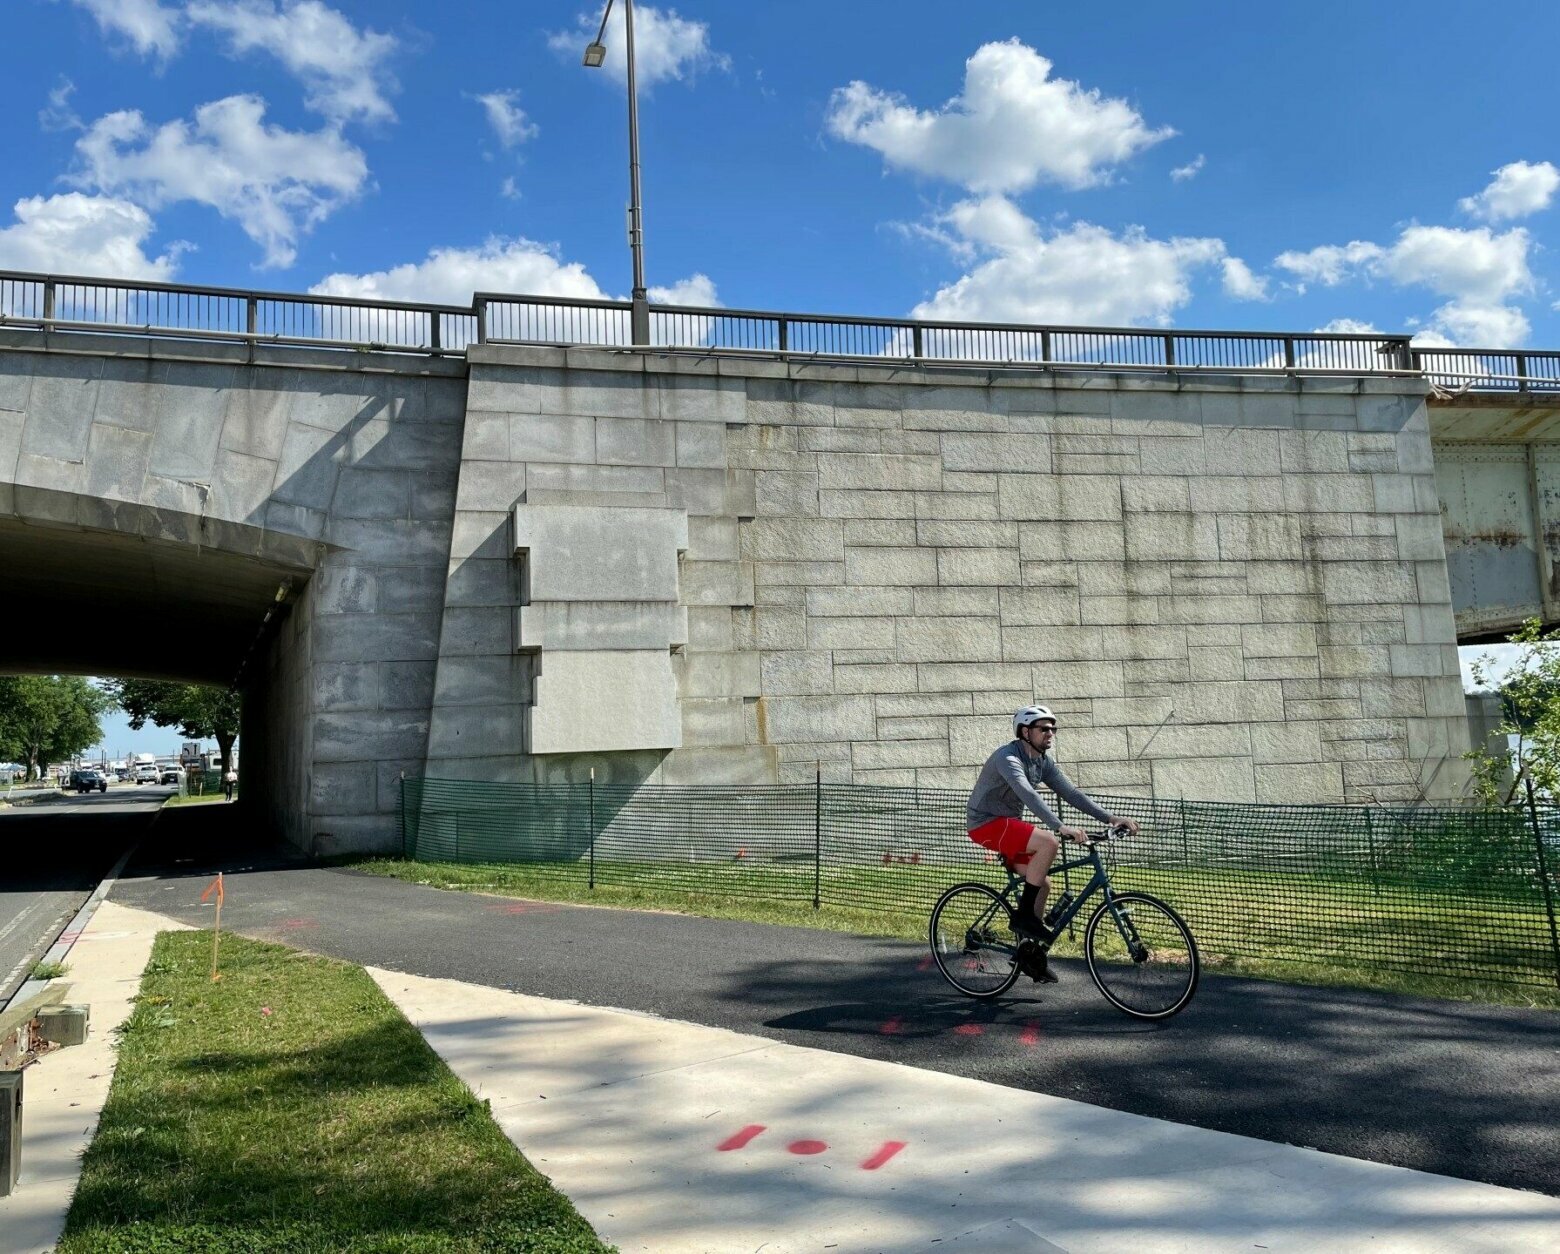 This tunnel under the bridge is aimed at improving pedestrian and biker safety, according to the National Park Service. 